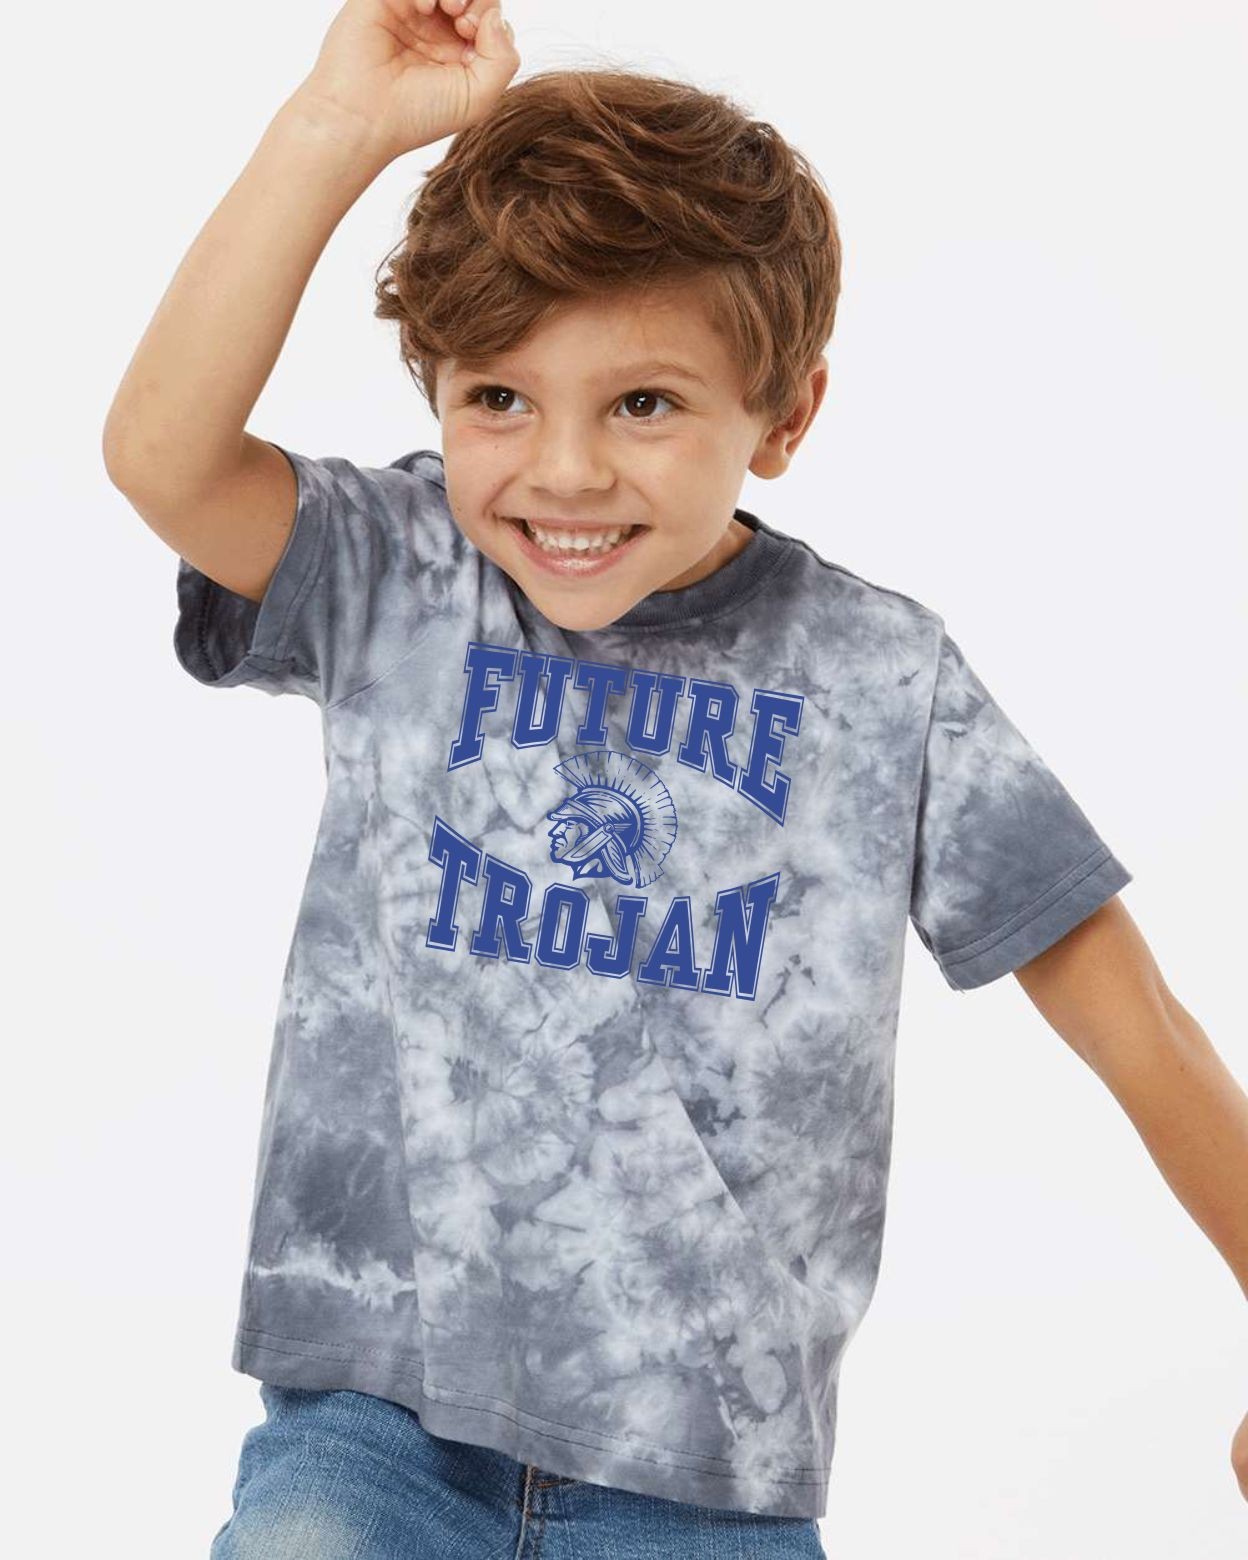 Toddler West Central Future Trojan Crystal Dye T-Shirt - Silver